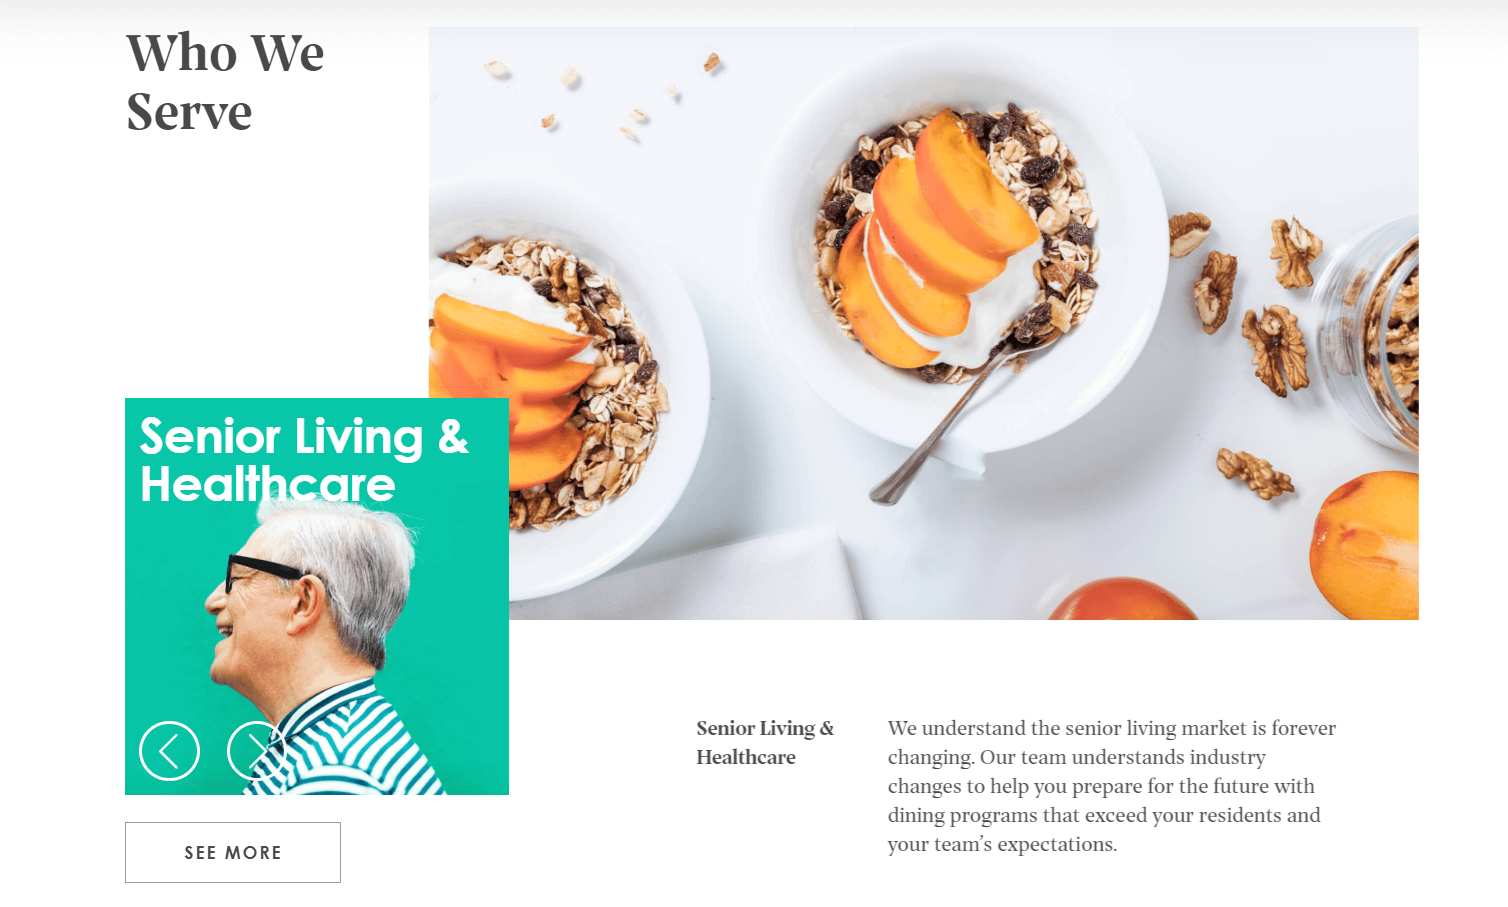 A page from Fresh Ideas Food website showing that they serve for senior living and healthcare